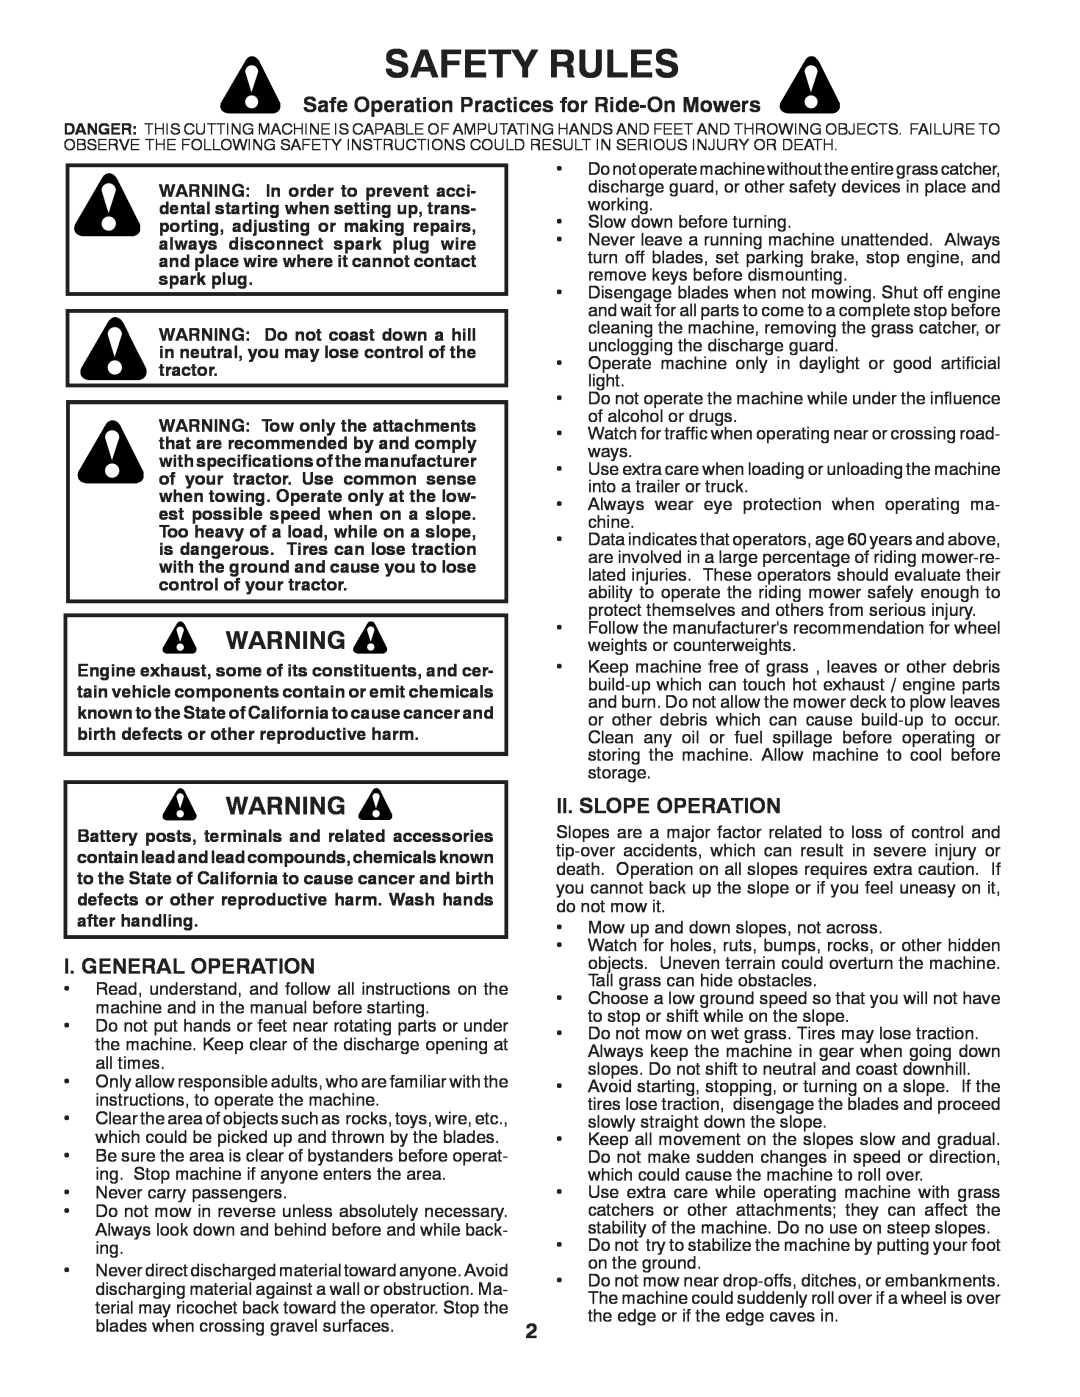 Poulan 96042003505 Safety Rules, Safe Operation Practices for Ride-On Mowers, I. General Operation, Ii. Slope Operation 